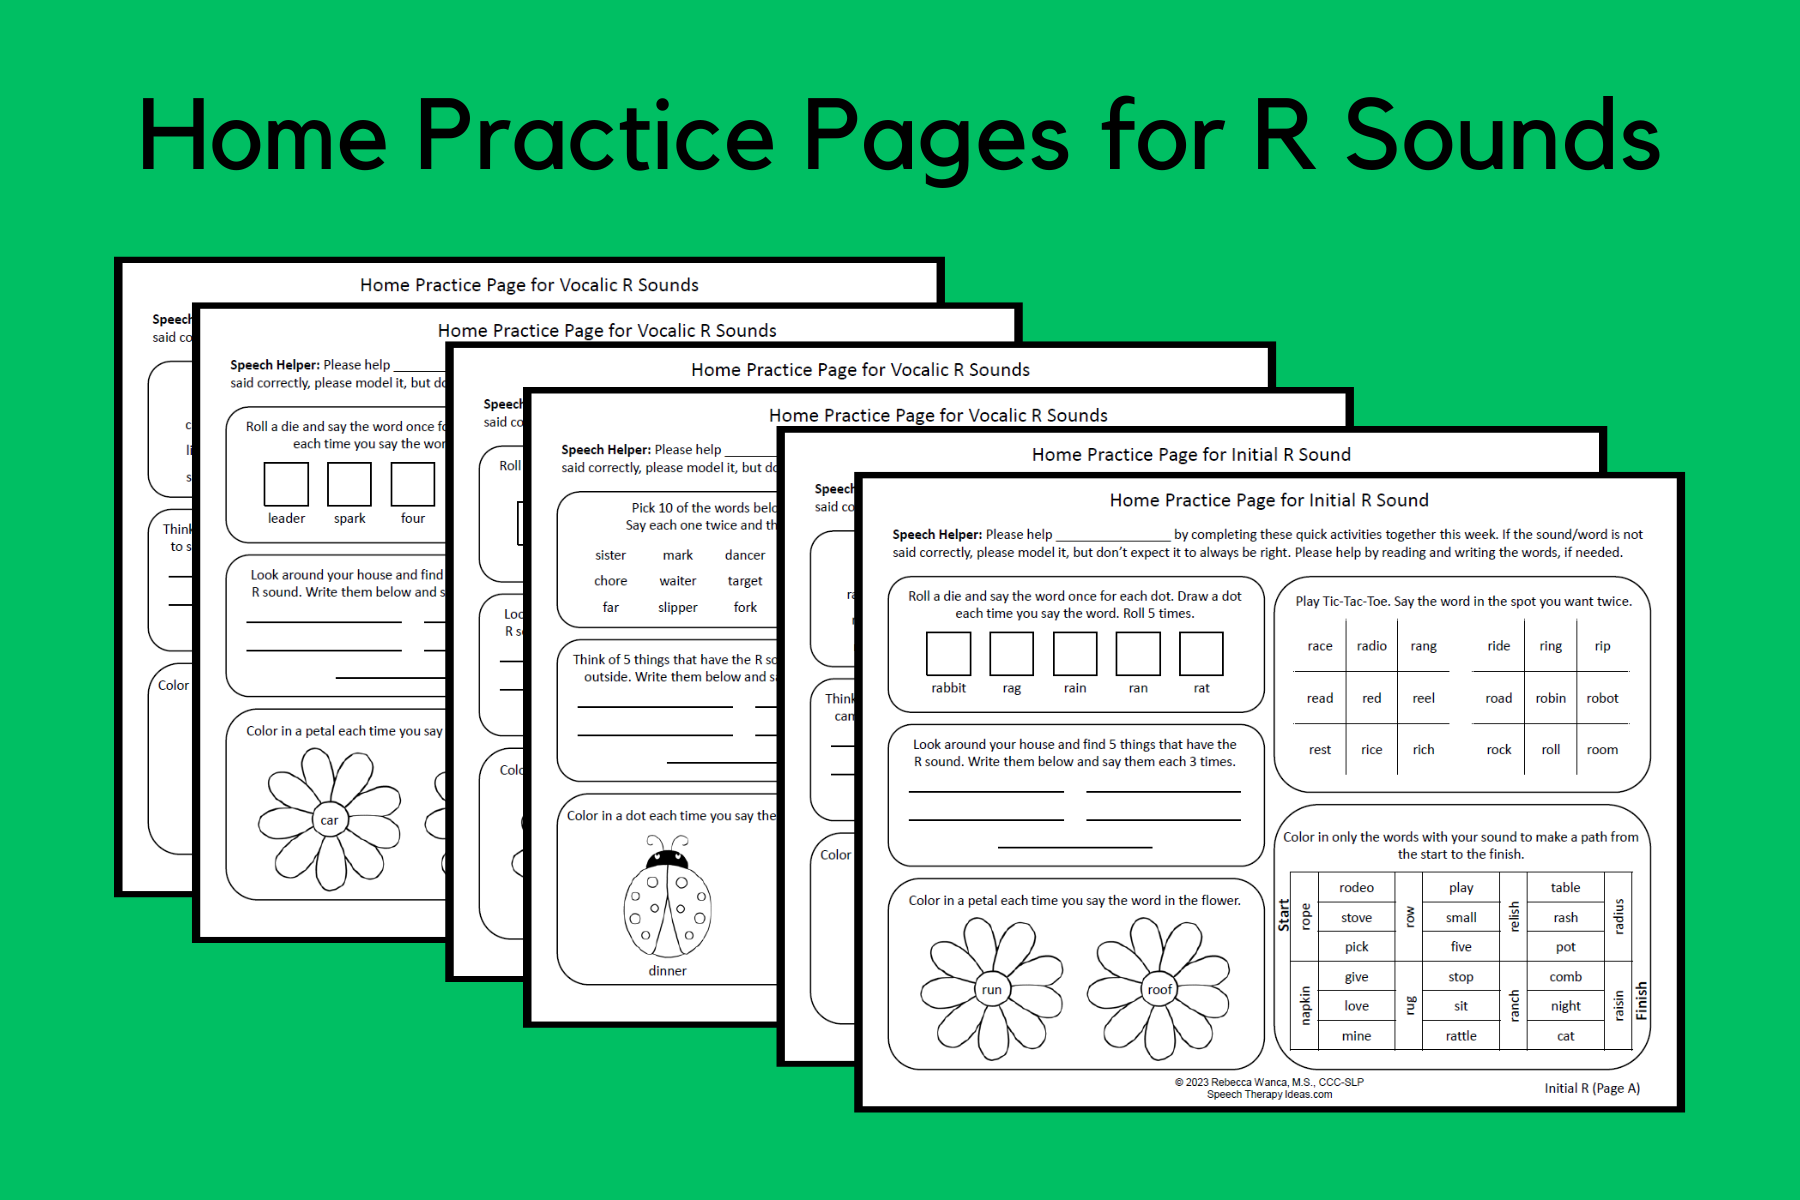 Home Practice Pages for R Sounds